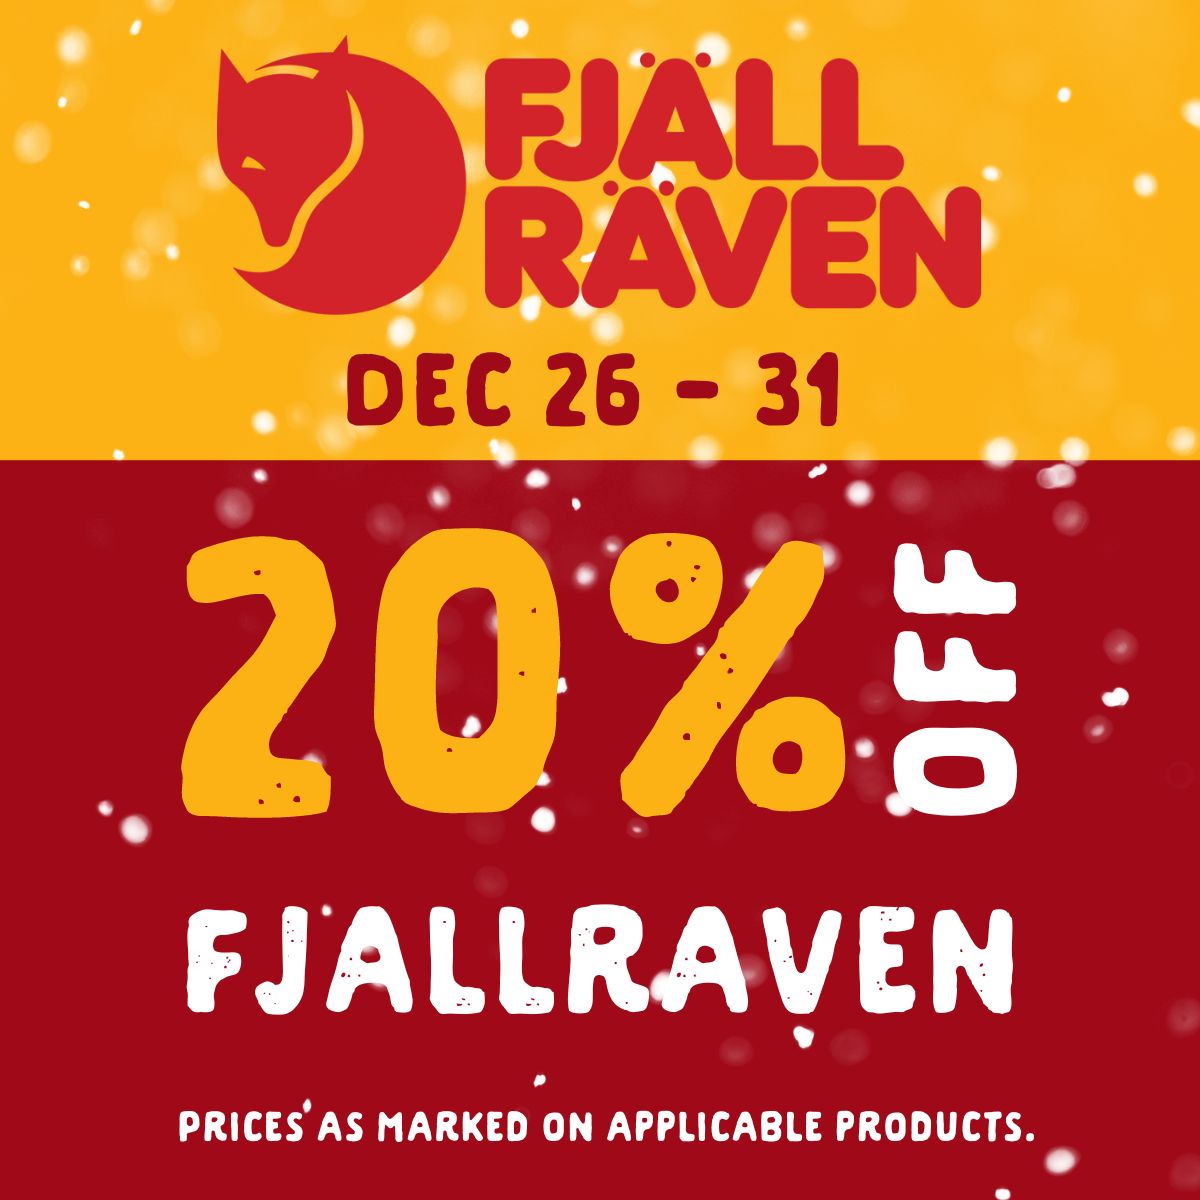 20% off Fjallraven from December 26 to 31. Prices as marked on applicable products.